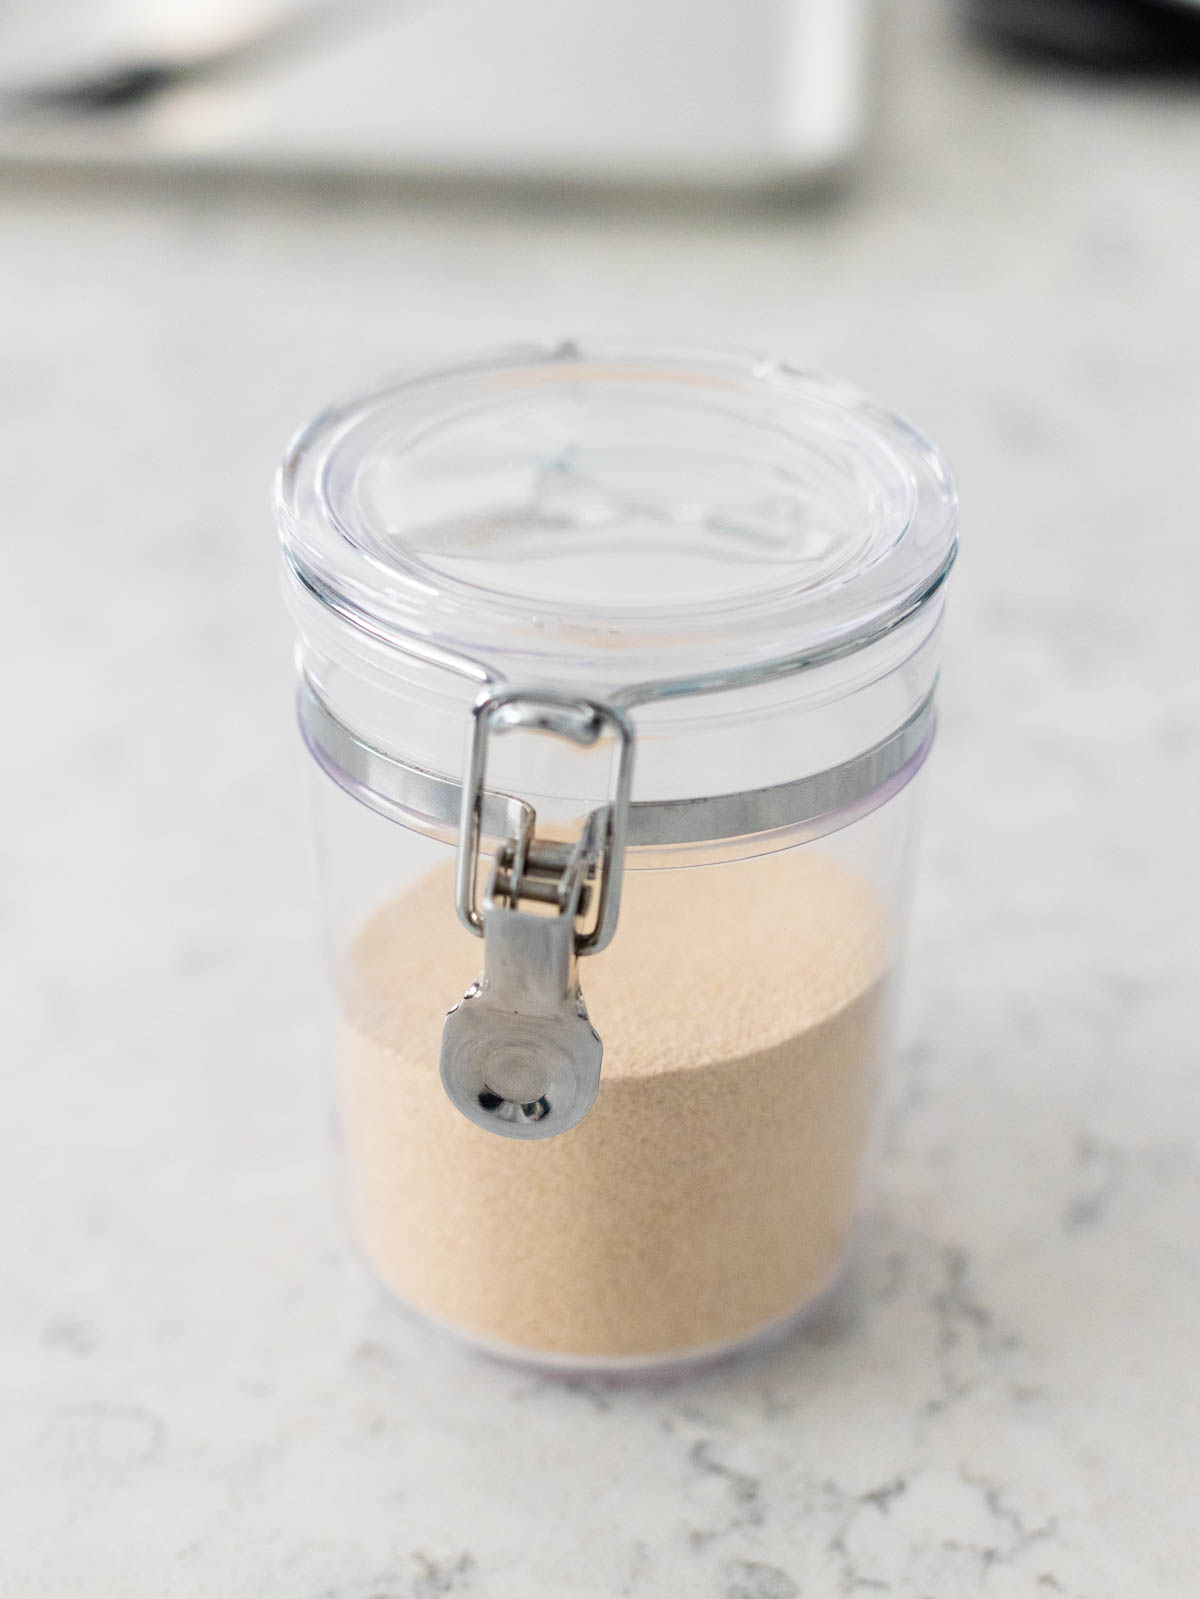 A jar of yeast is on the counter.